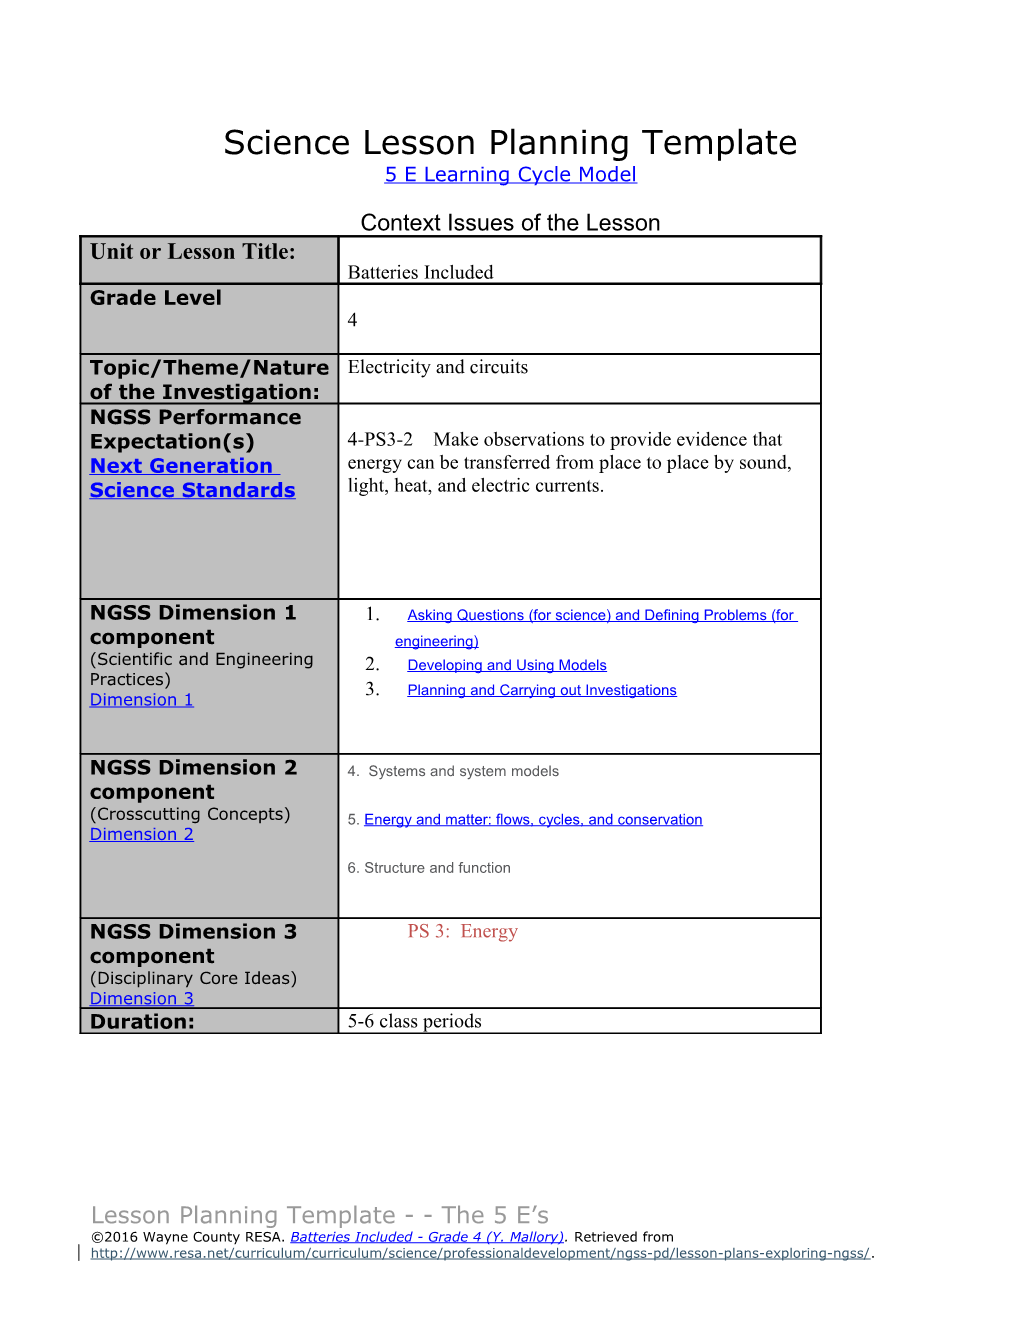 Science Lesson Planning Template s1